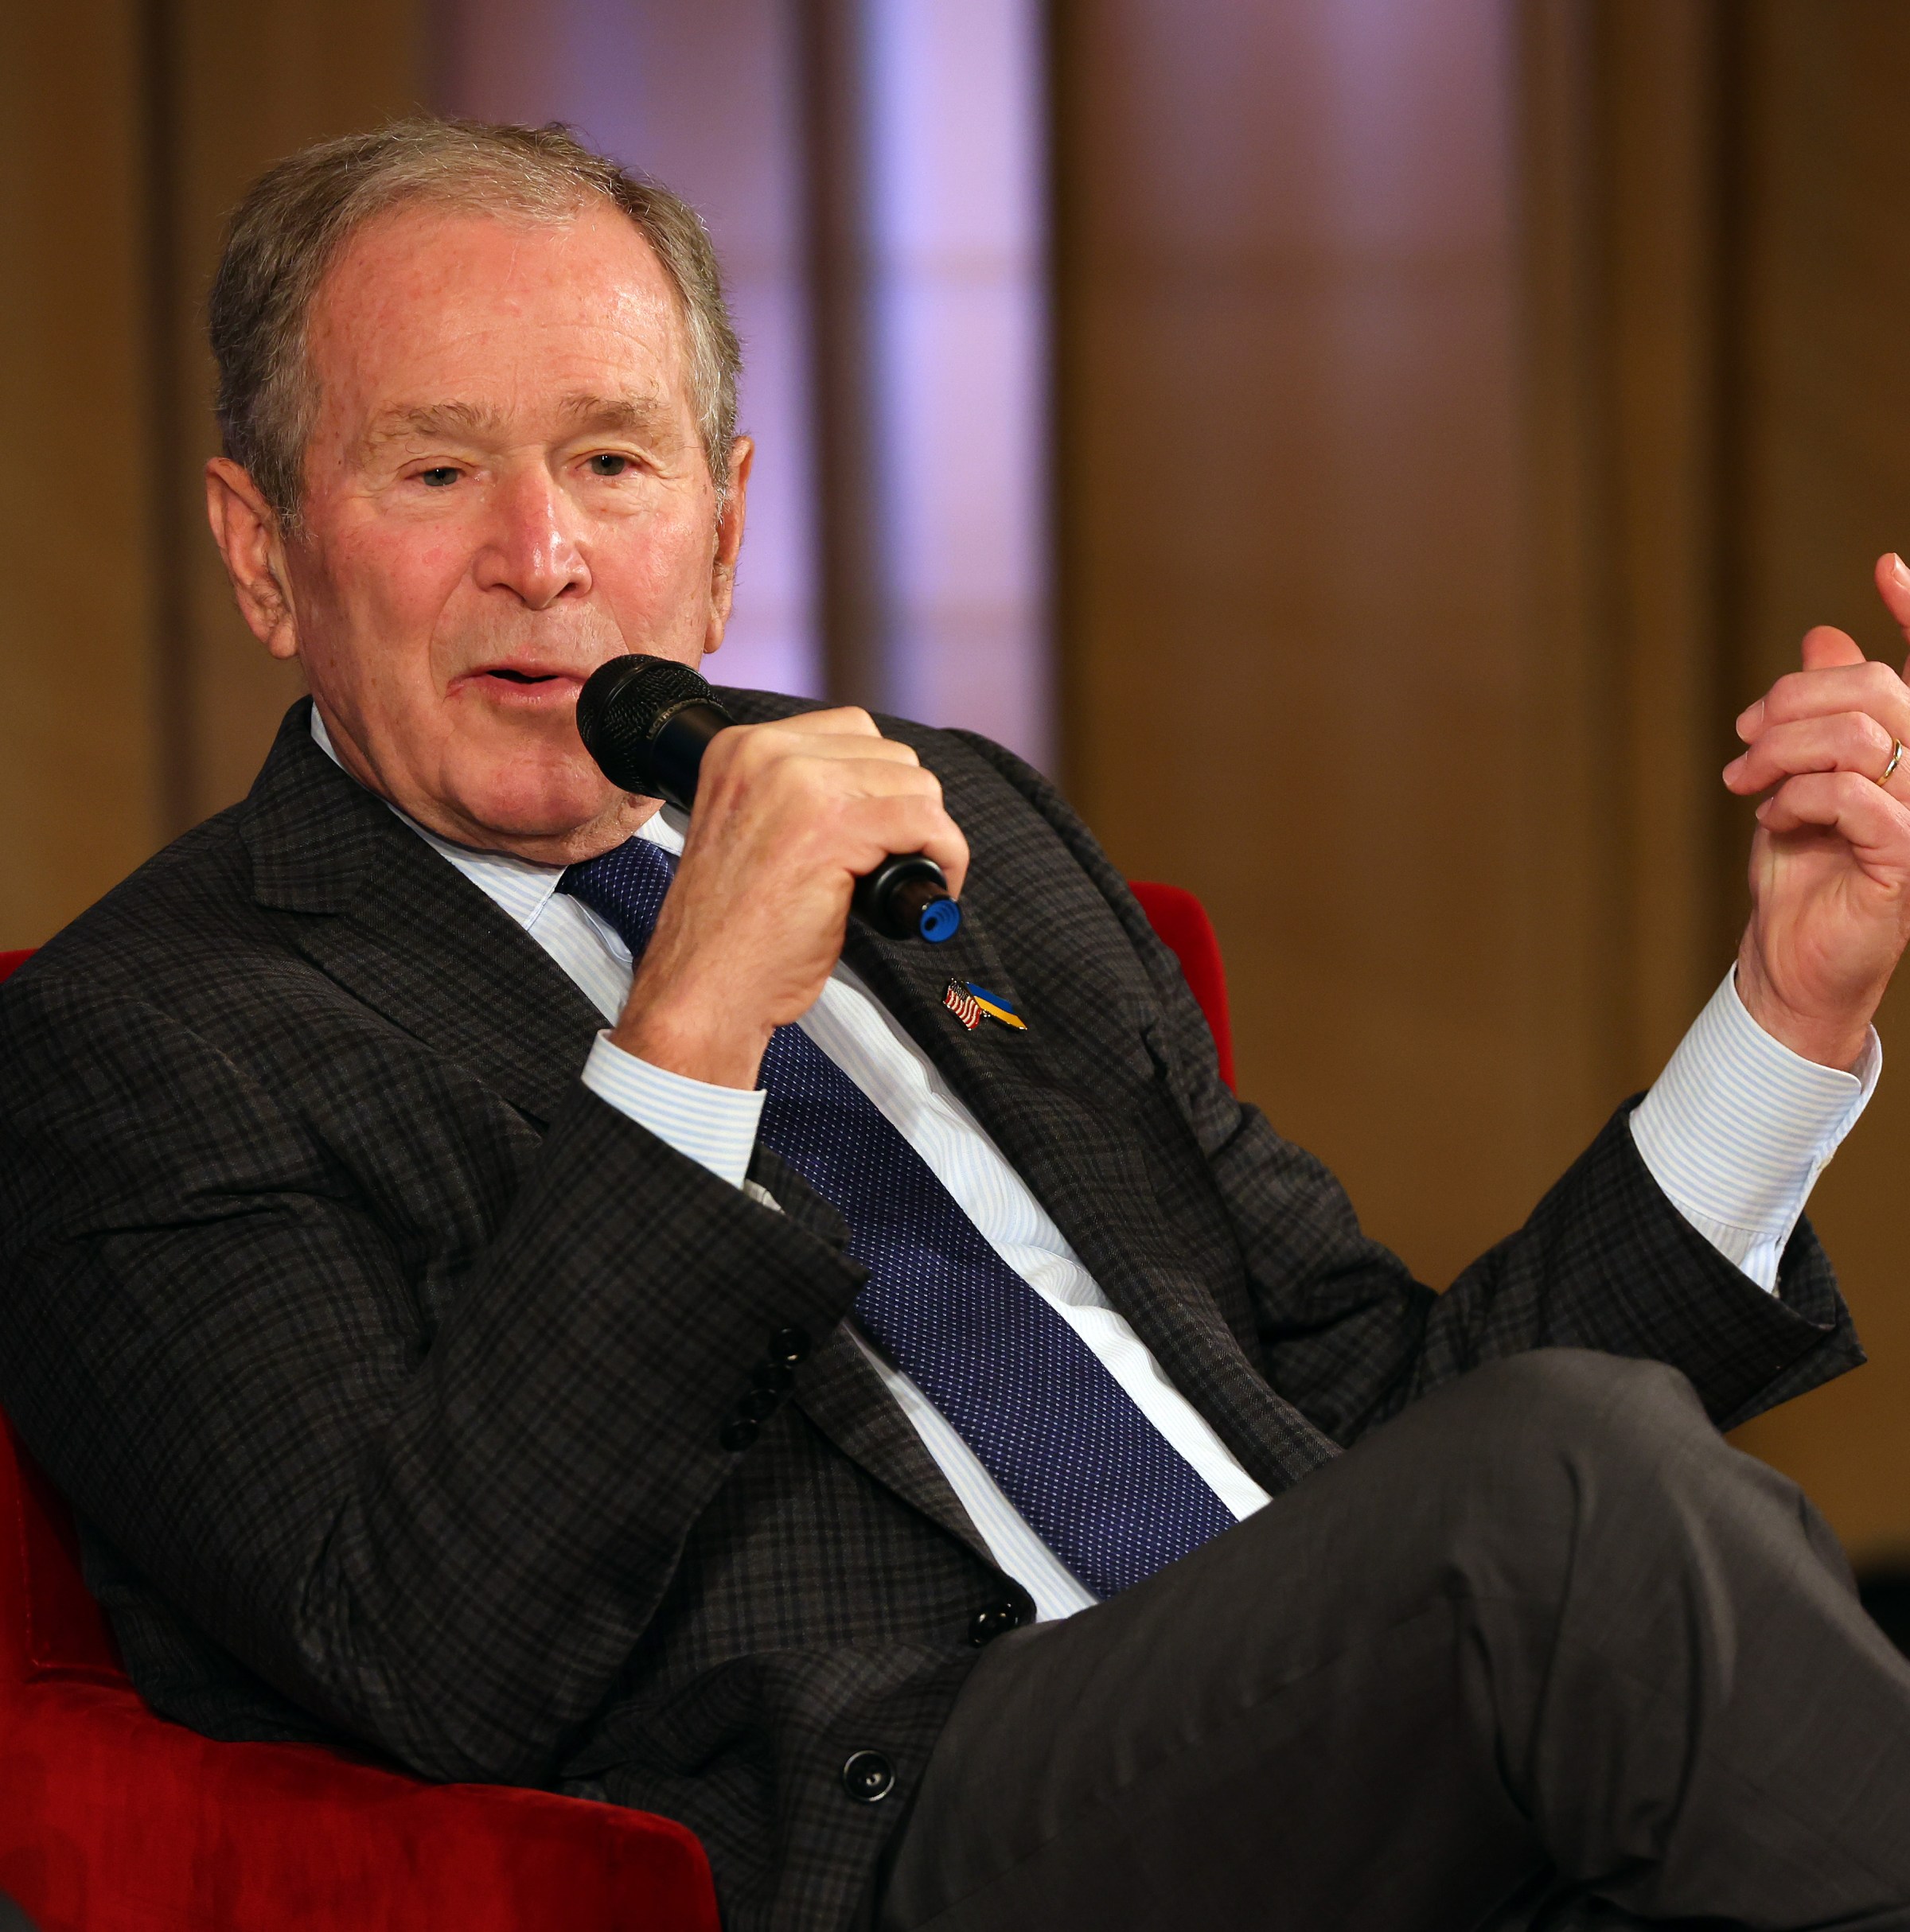 Justice Alito is mad that George W. Bush was too woke